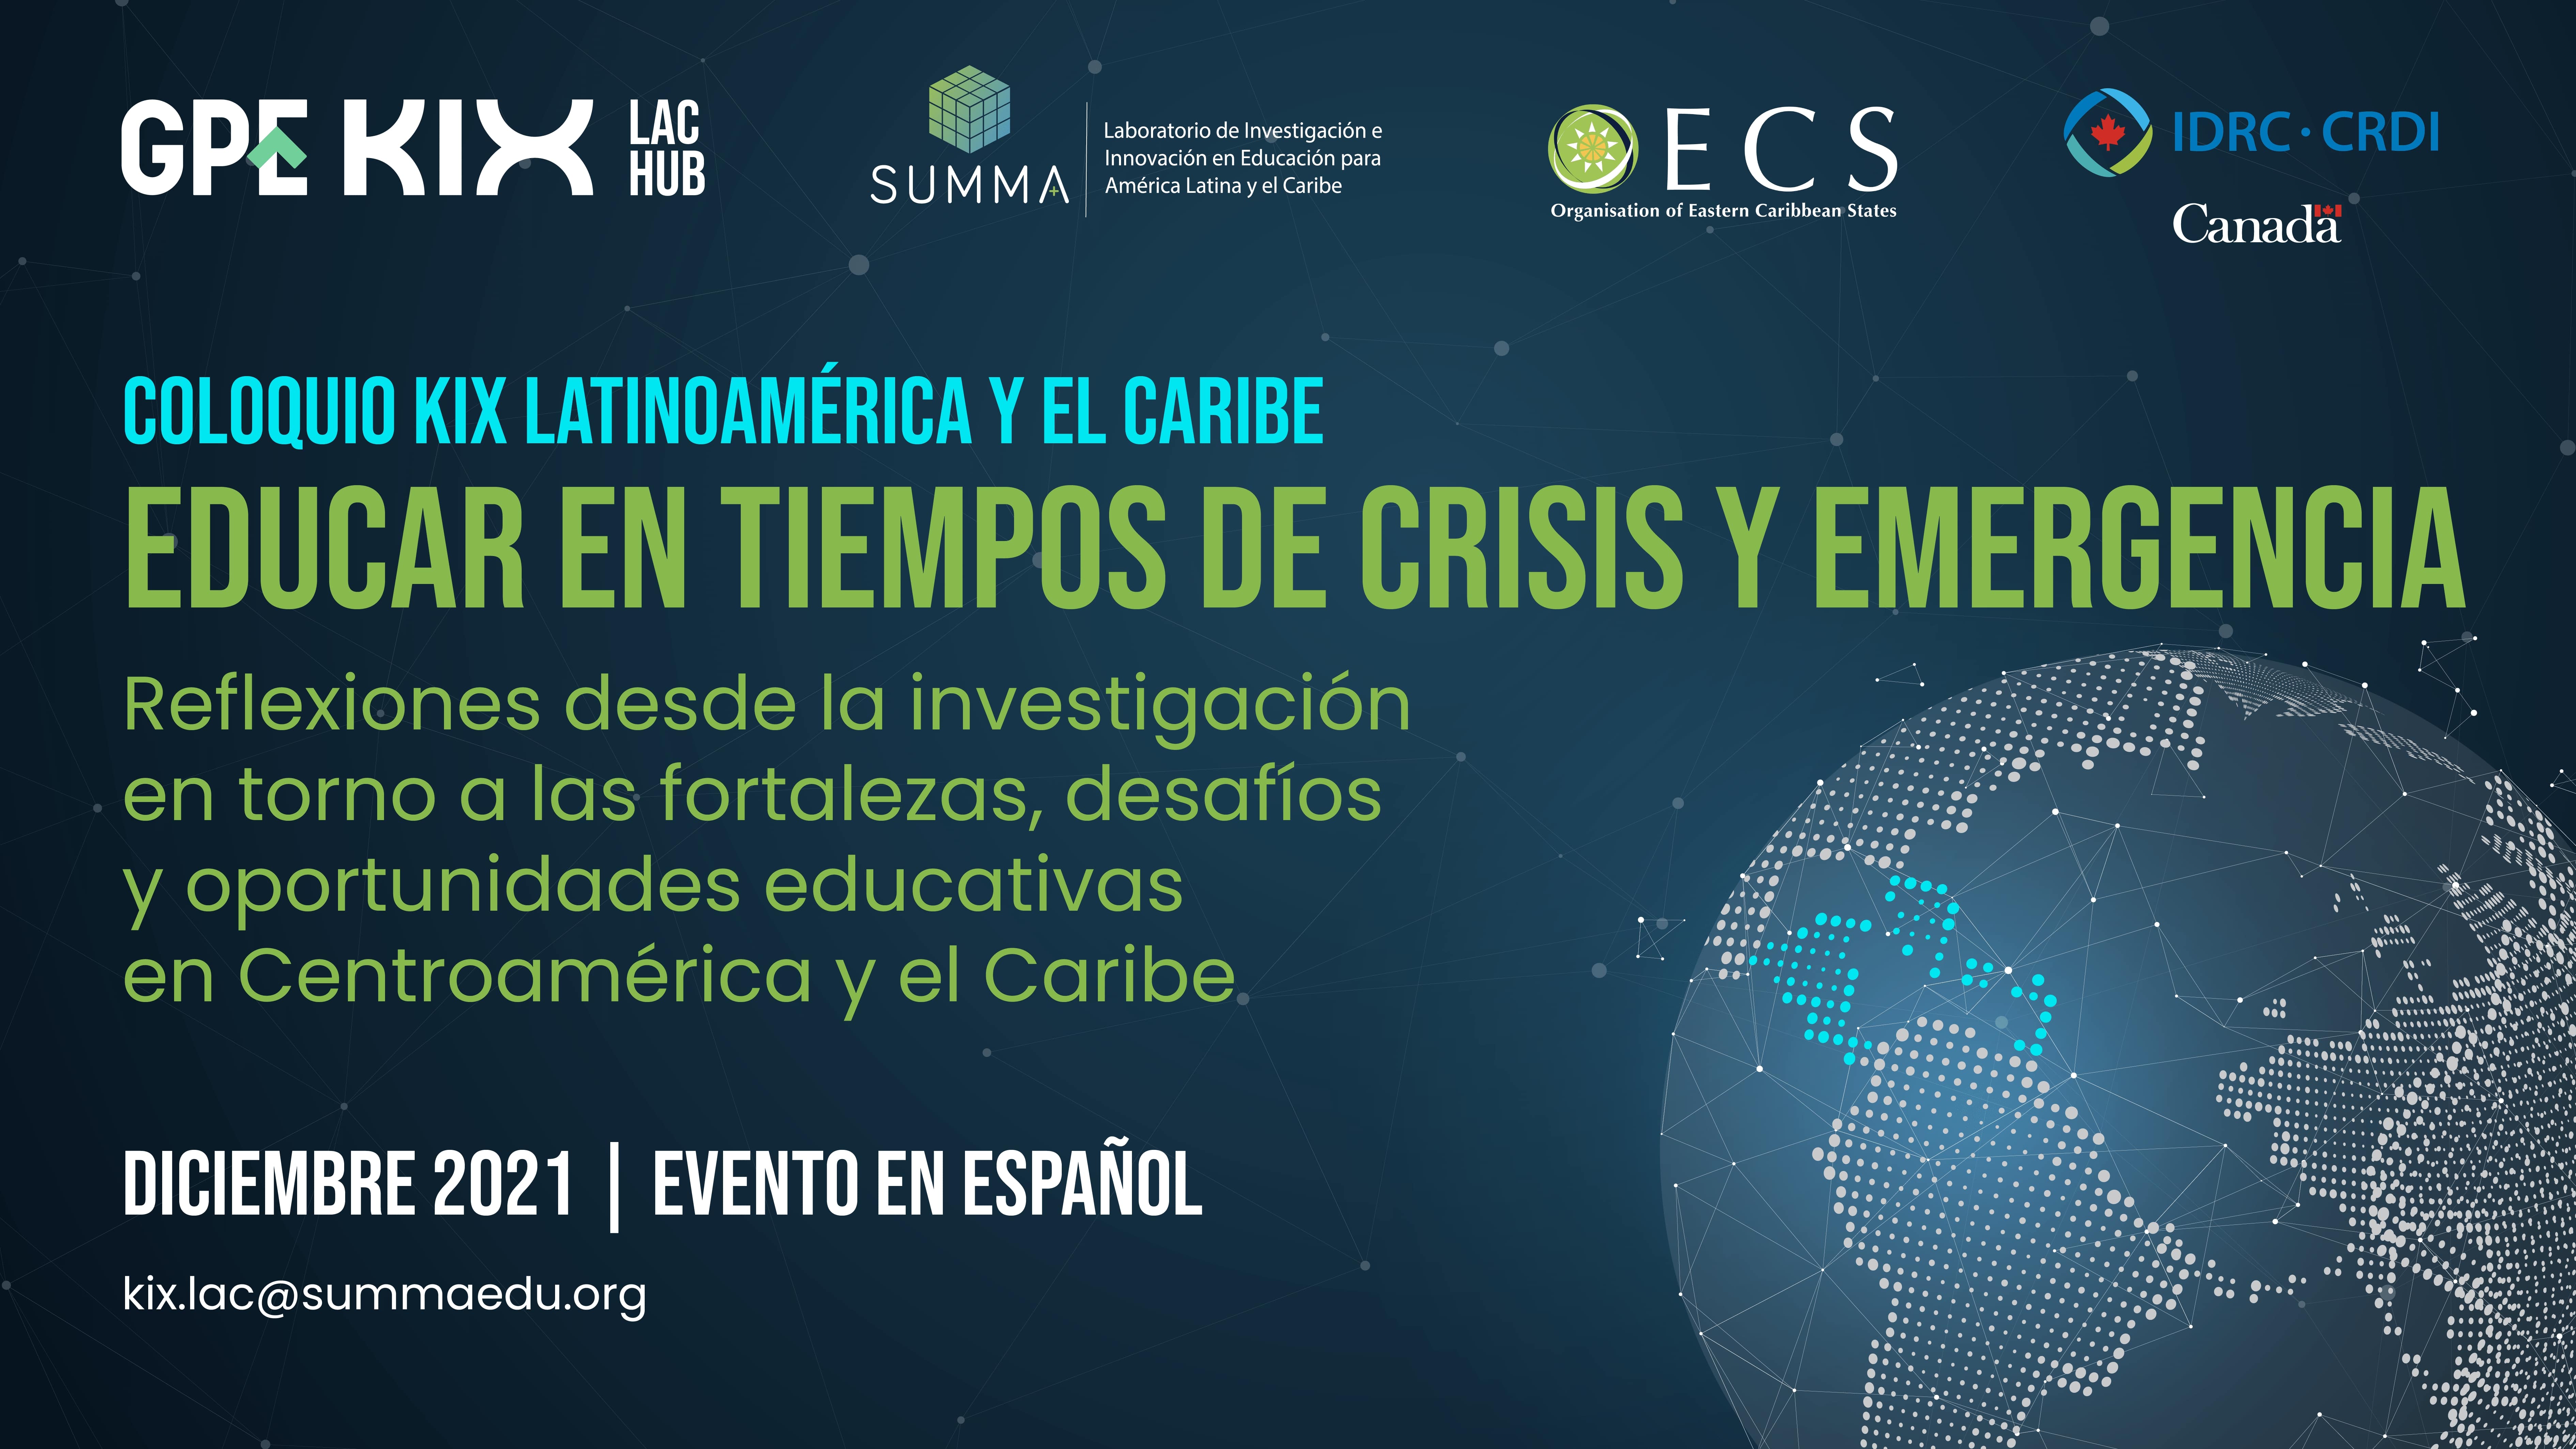 KIX LAC Symposium "Educating in Times of Crisis and Emergencies" - Call for lectures